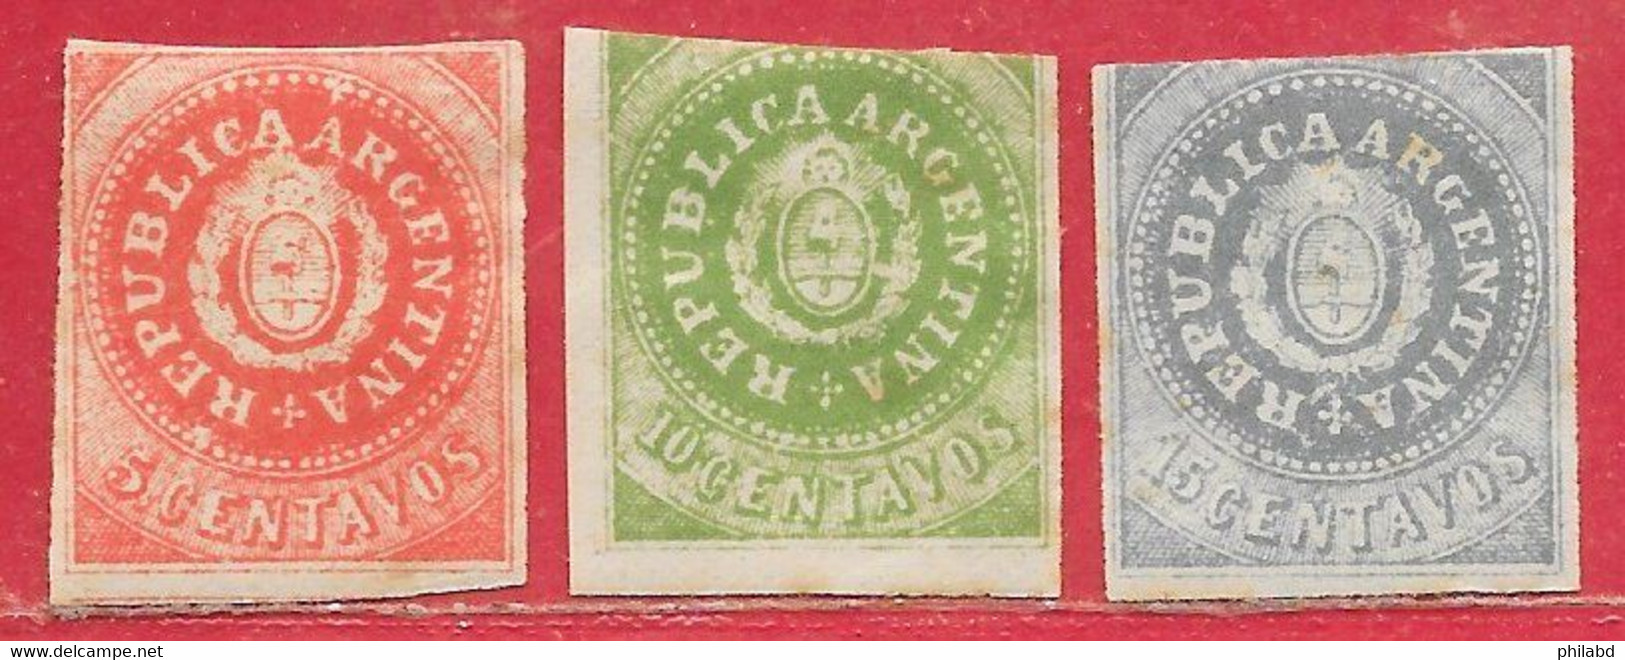 Argentine N°5 à/to 7 1862-64 (faux / False / Falso) * - Unused Stamps